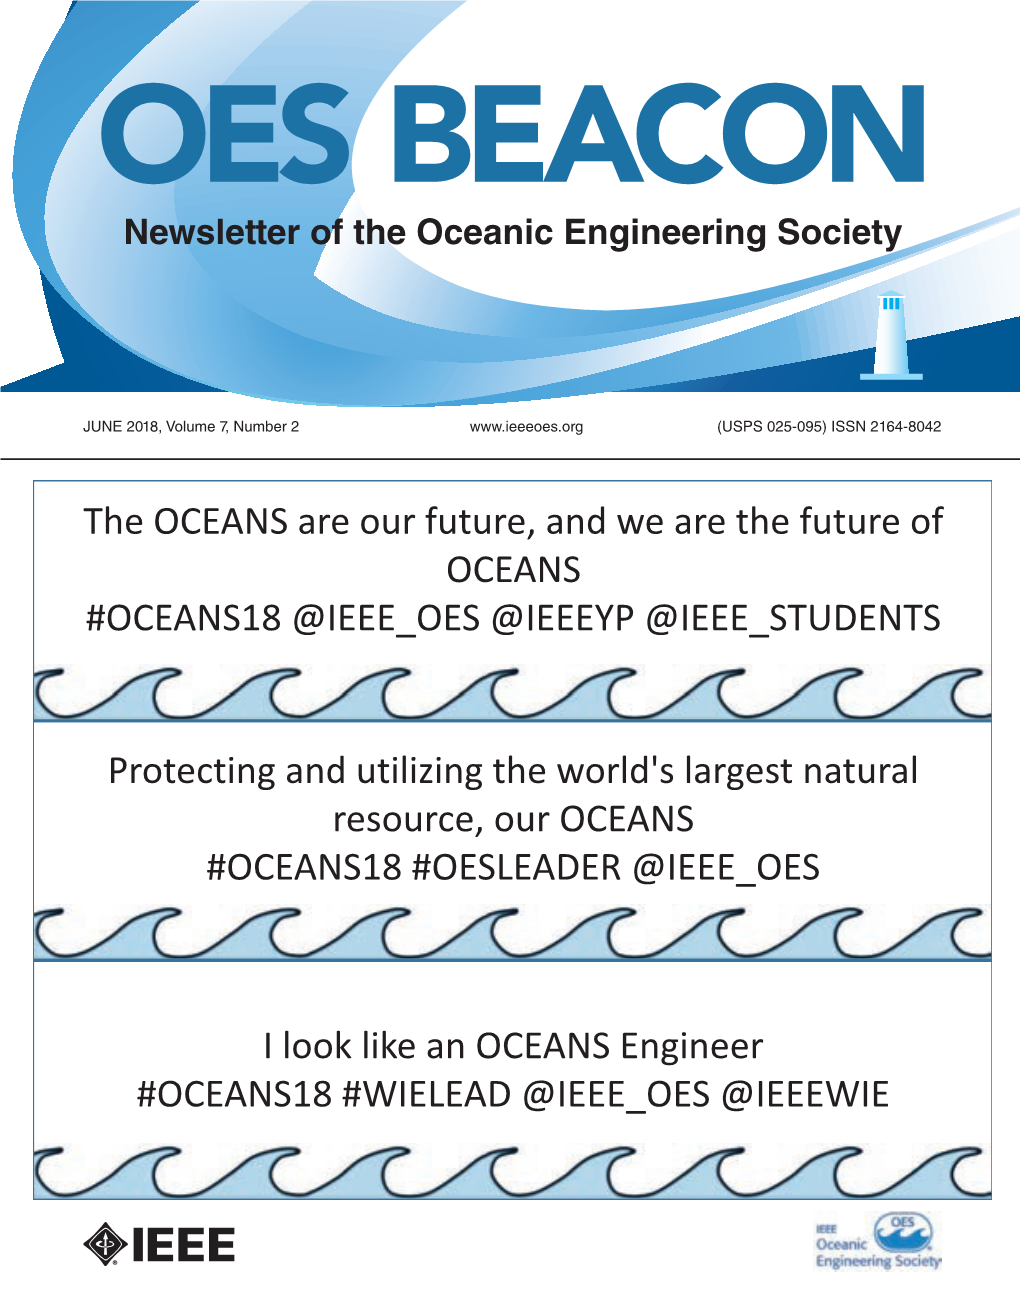 The OCEANS Are Our Future, and We Are the Future of OCEANS #OCEANS18 @IEEE OES @IEEEYP @IEEE STUDENTS